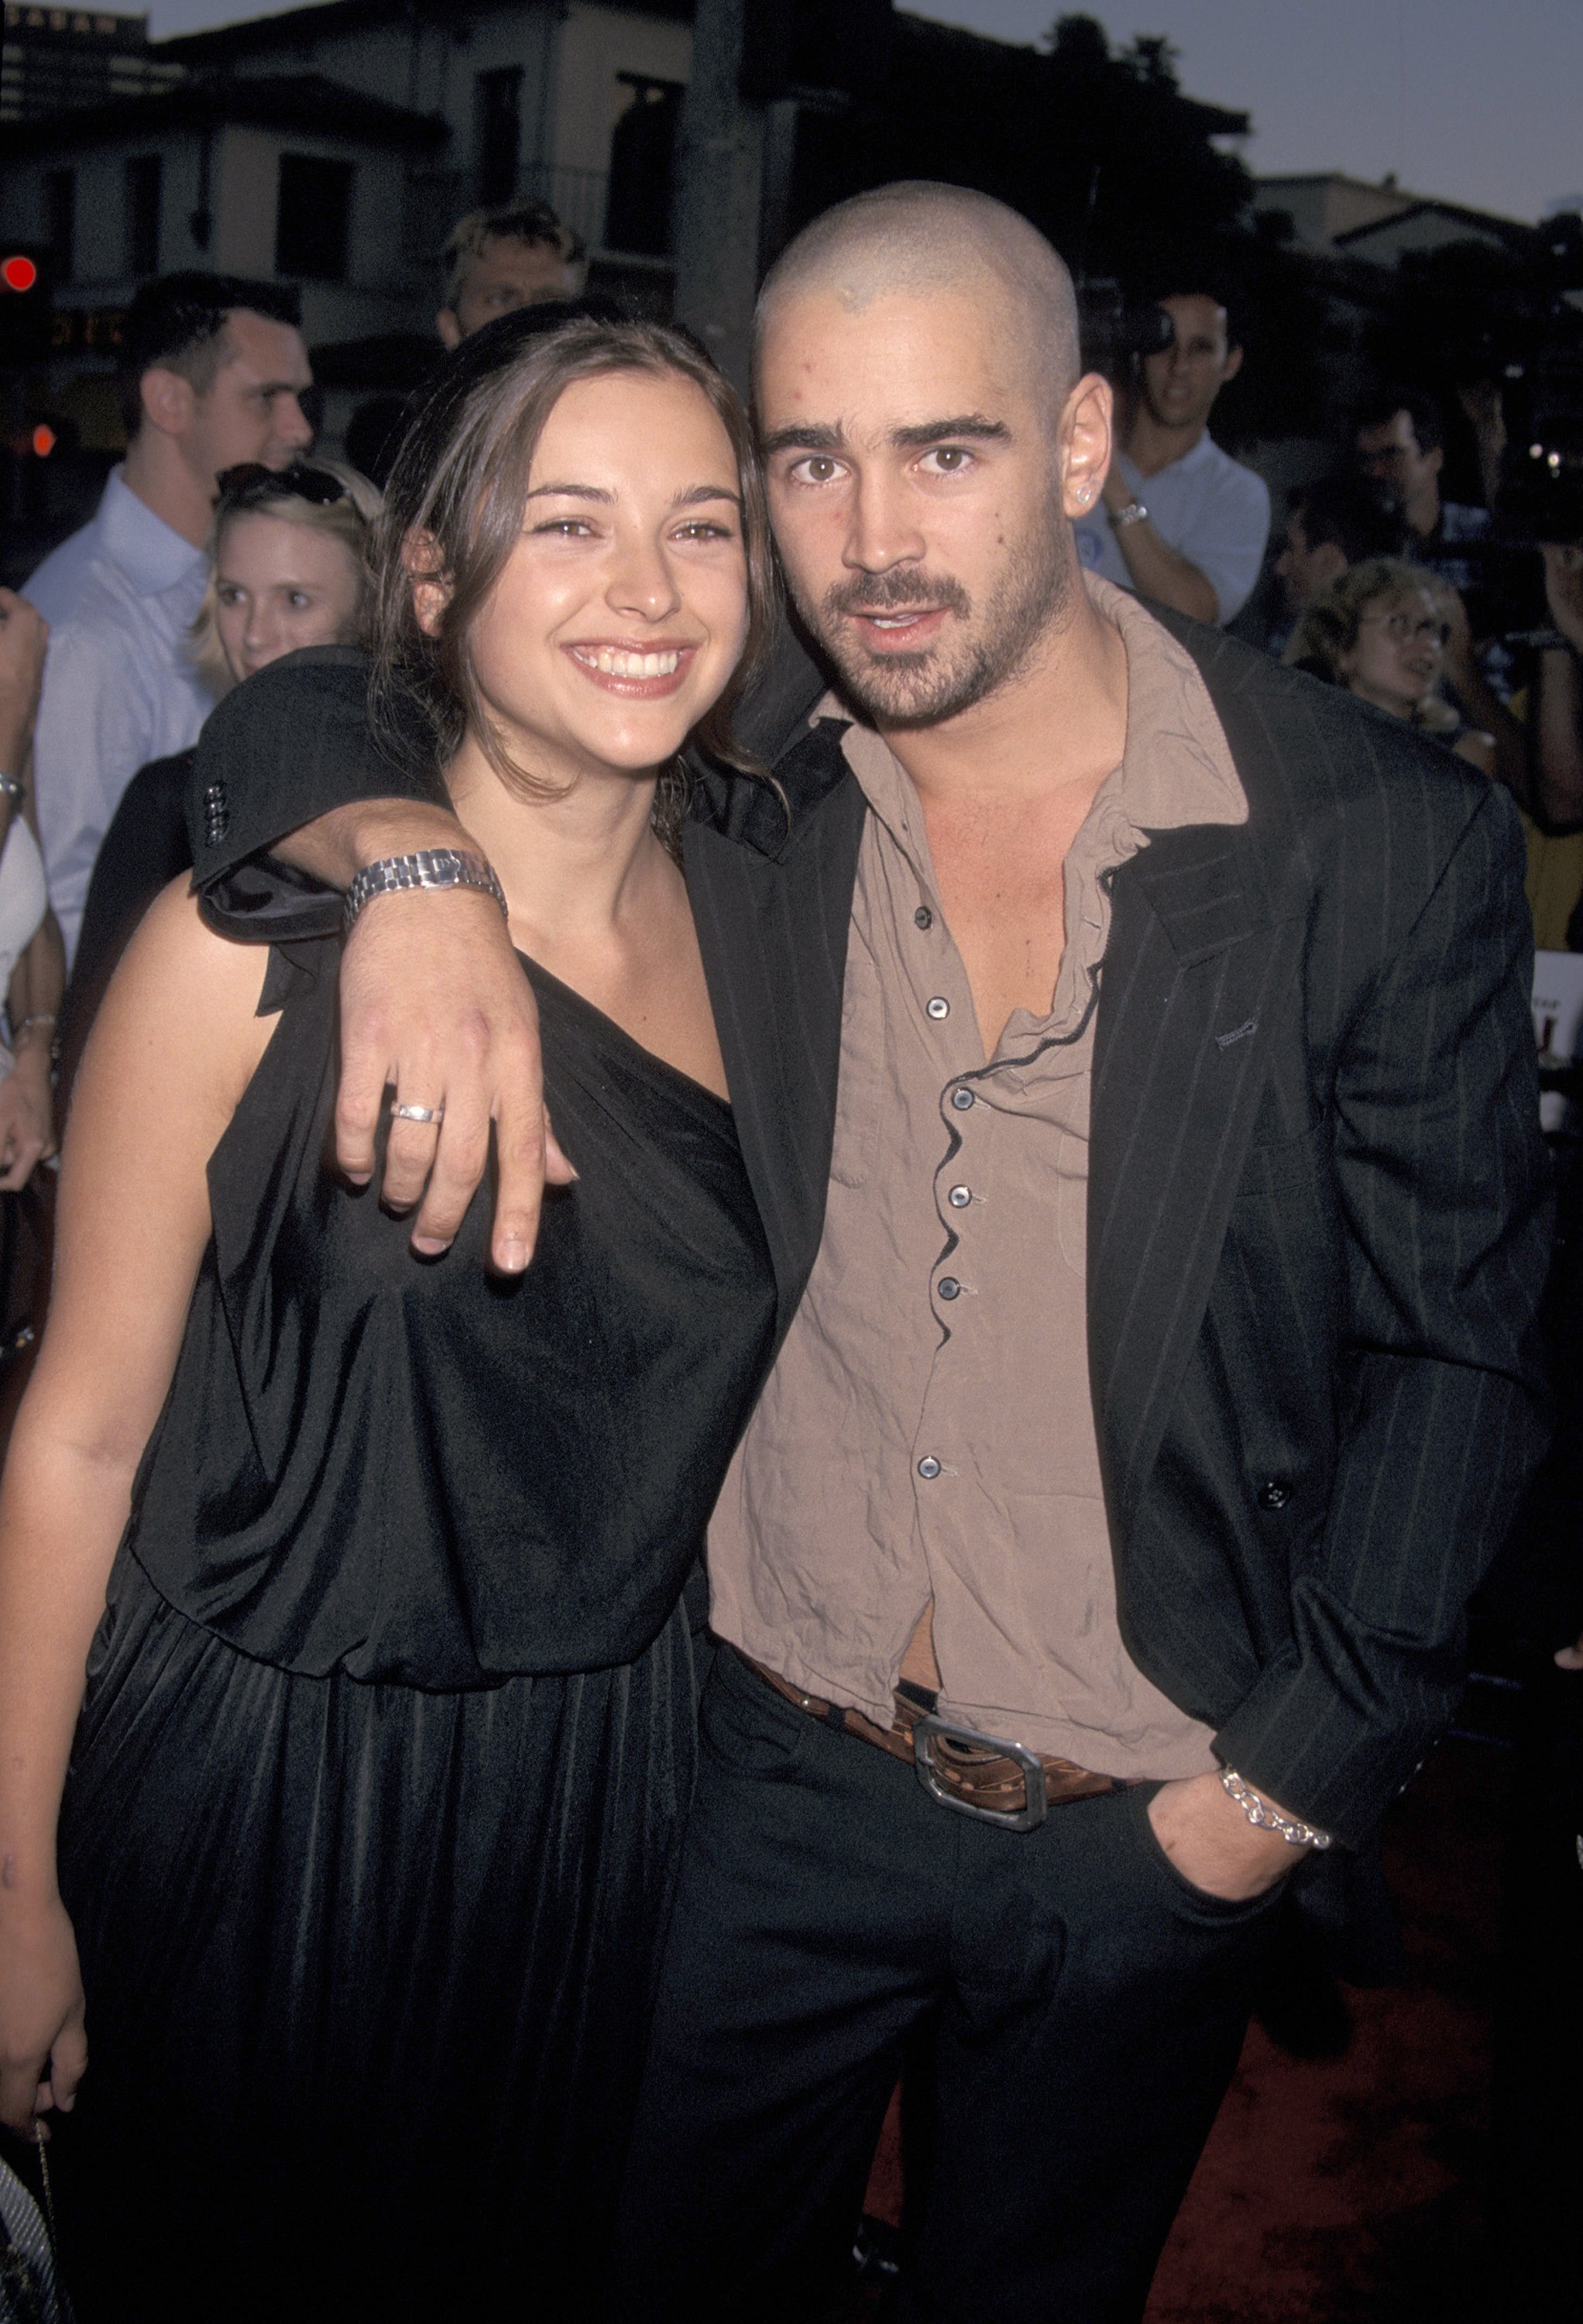 Colin Farrell and Amelia Warner at the "American Outlaws" Los Angeles premiere in 2001. | Source: Getty Images